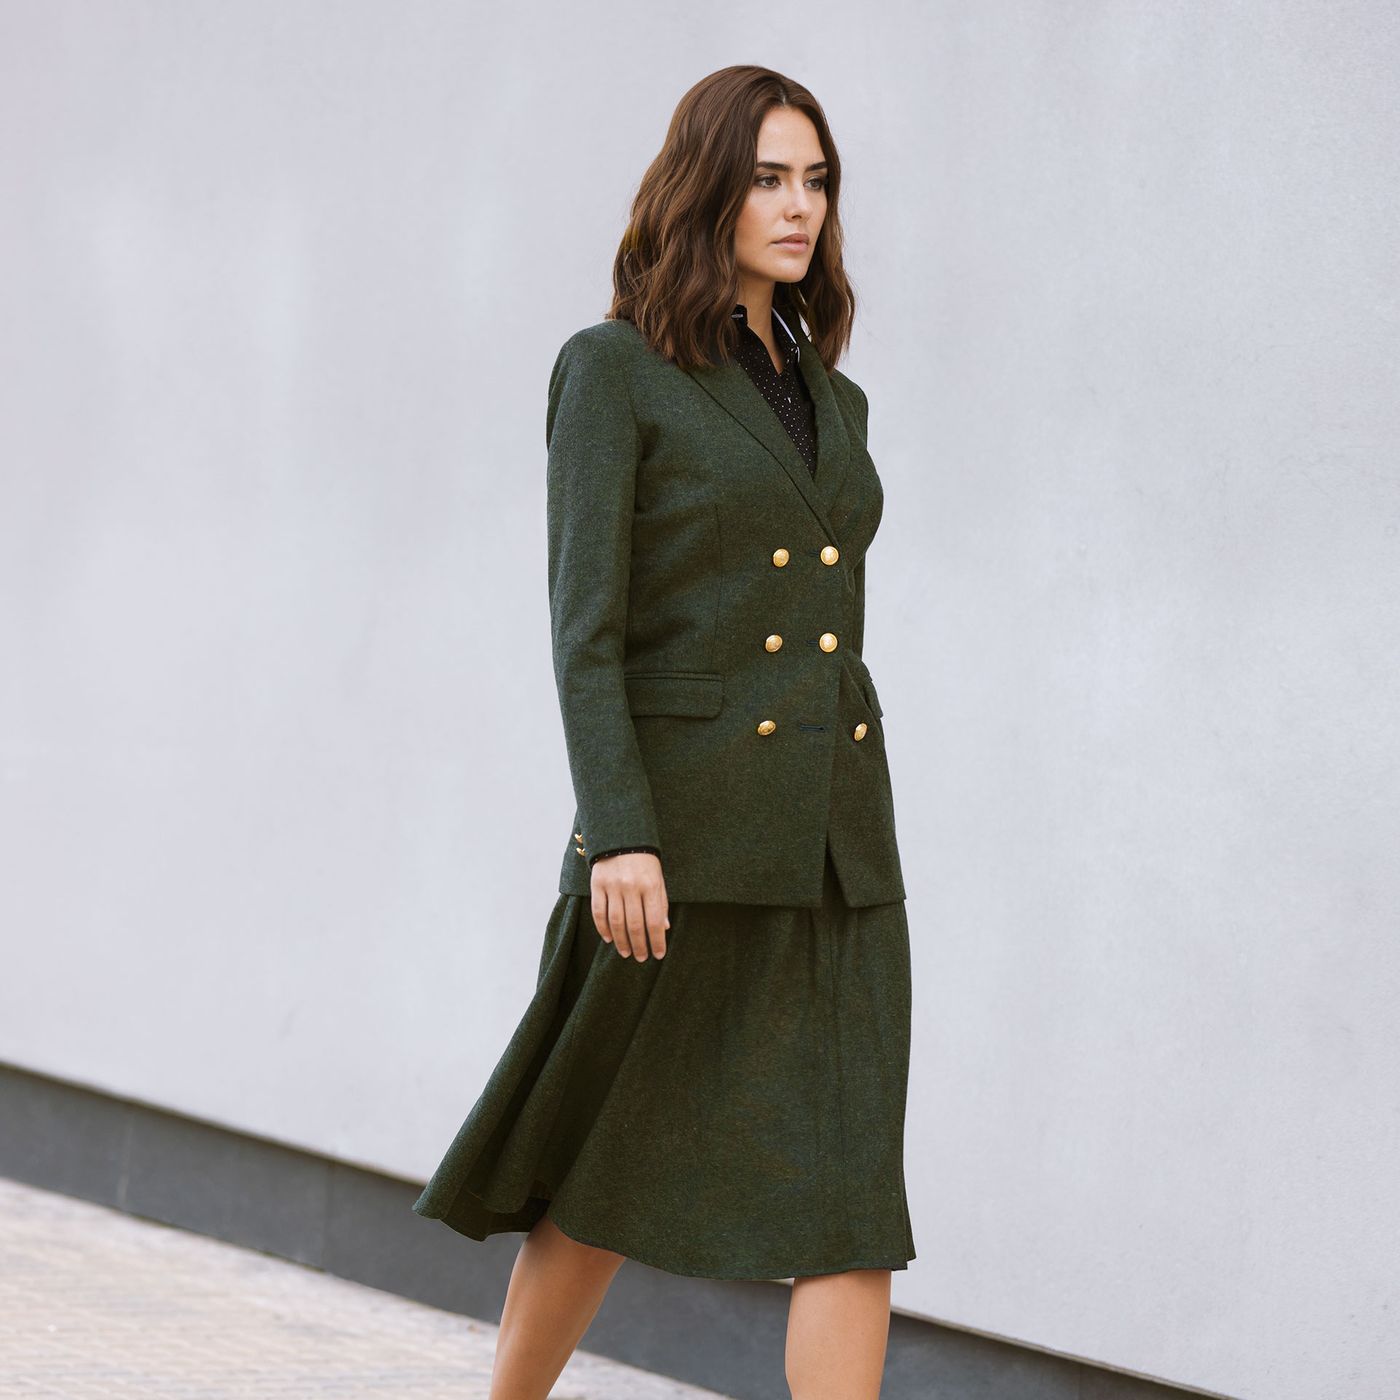 Green Skirt Suit with golden buttons